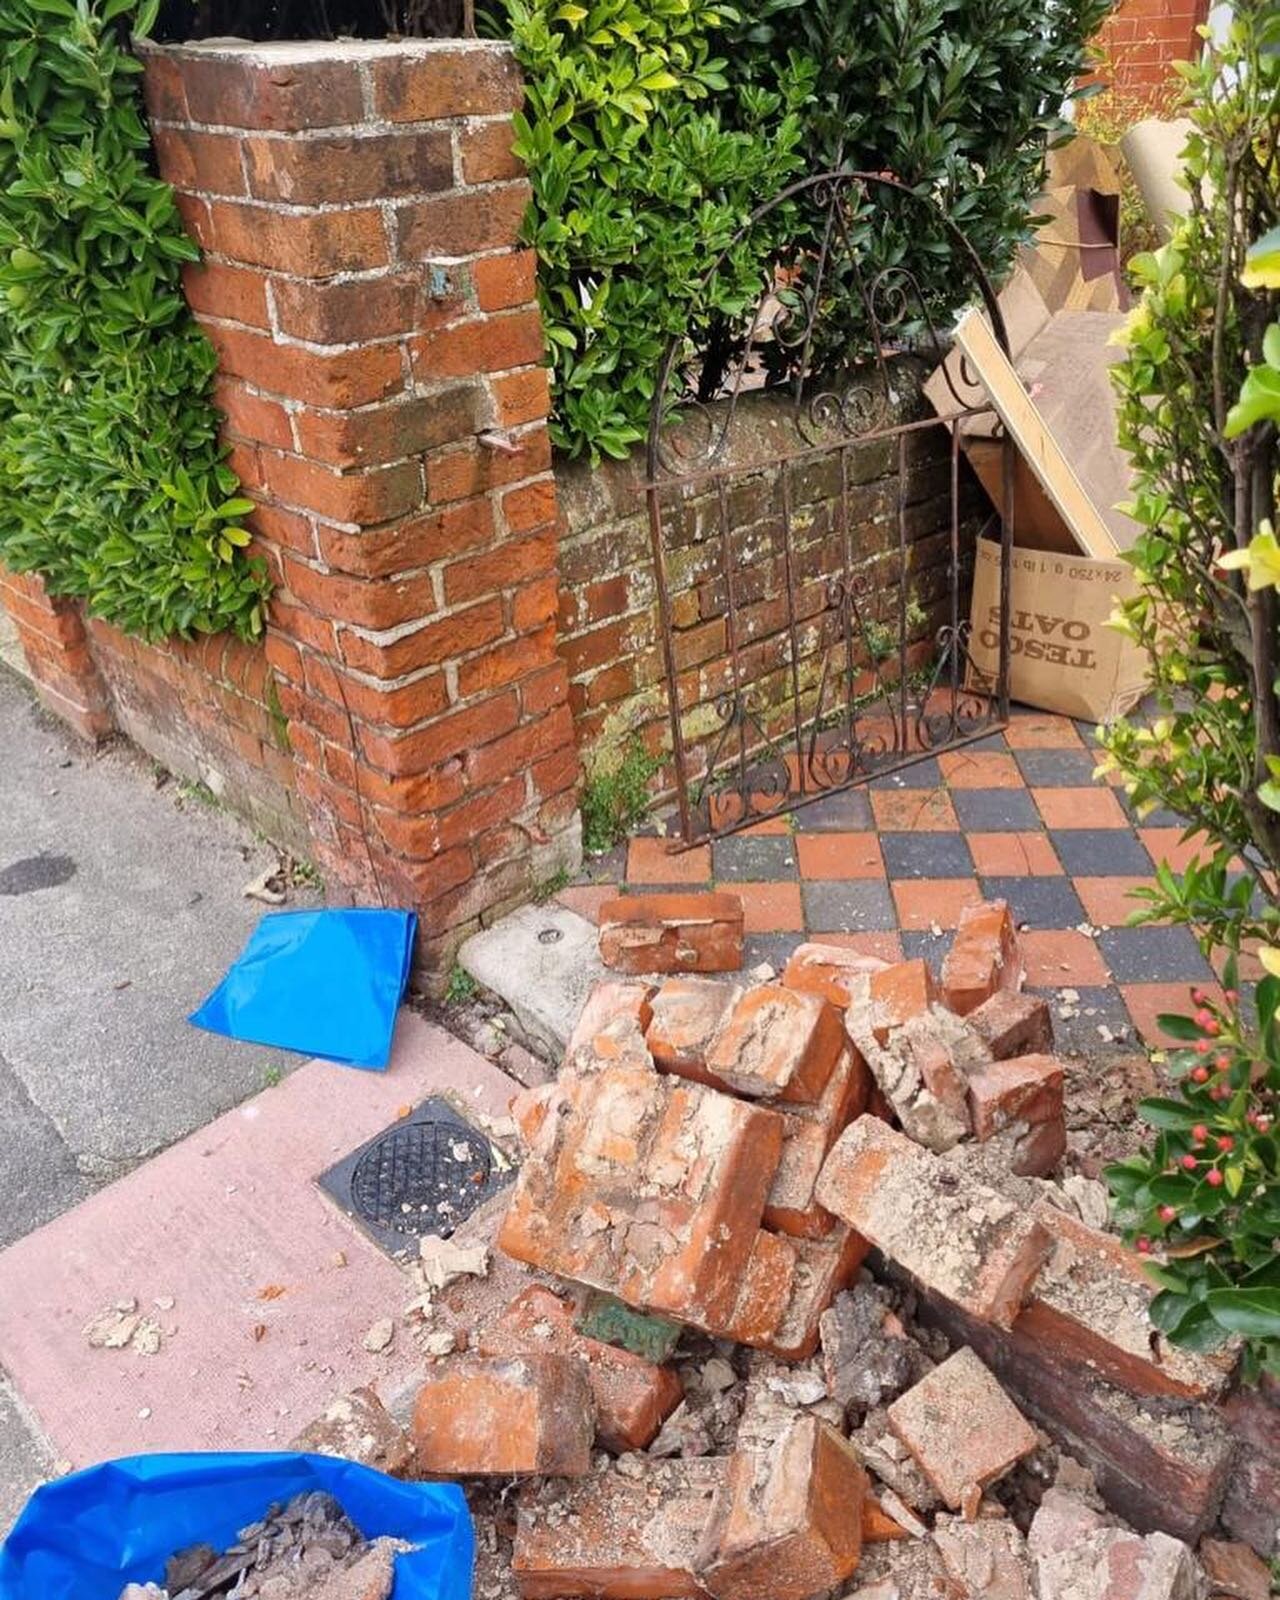 BEFORE &amp; AFTER 🧱 - We carefully took down these brick pillars (before they fell!) cleaned the bricks and relaid them, along with the capping stones and installed a NEW gate at this property in Eastbourne.

#property #maintenance #eastbourne 
#ea